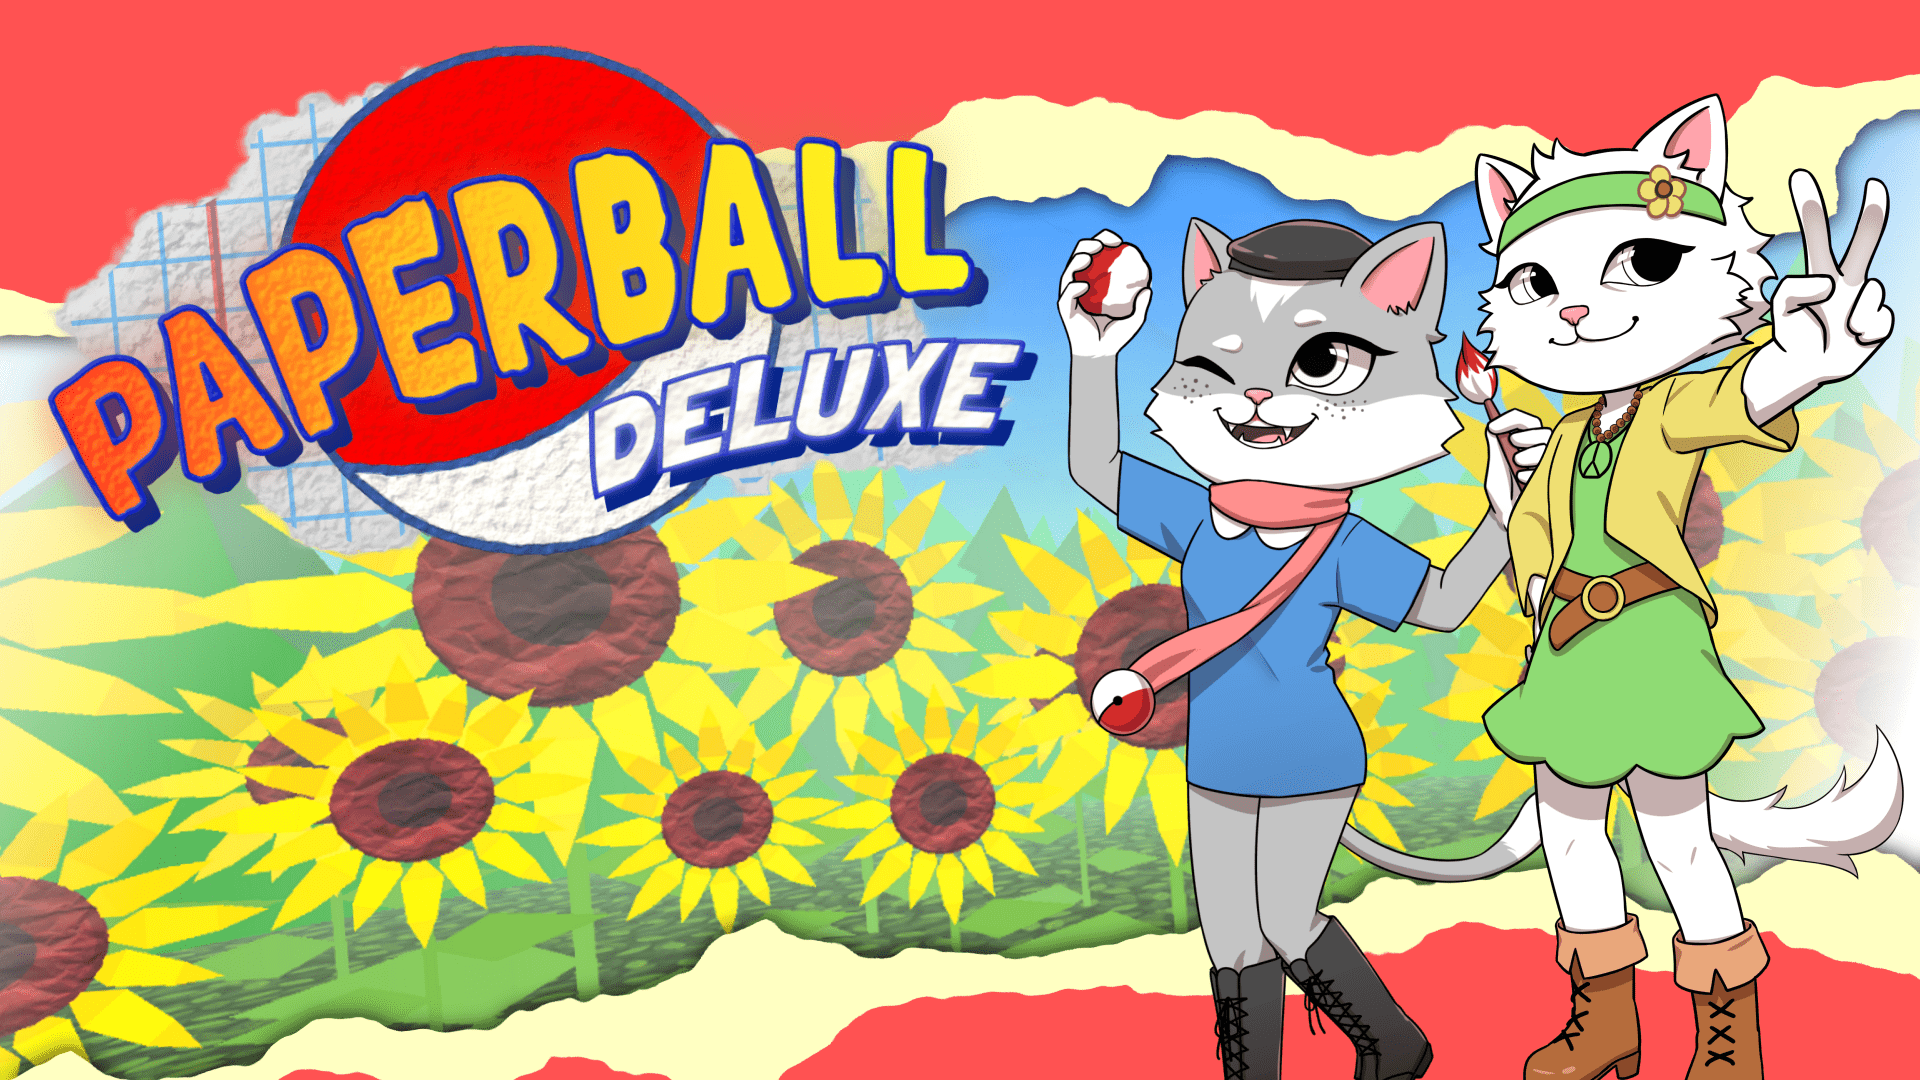 Paperball on Nintendo Switch!